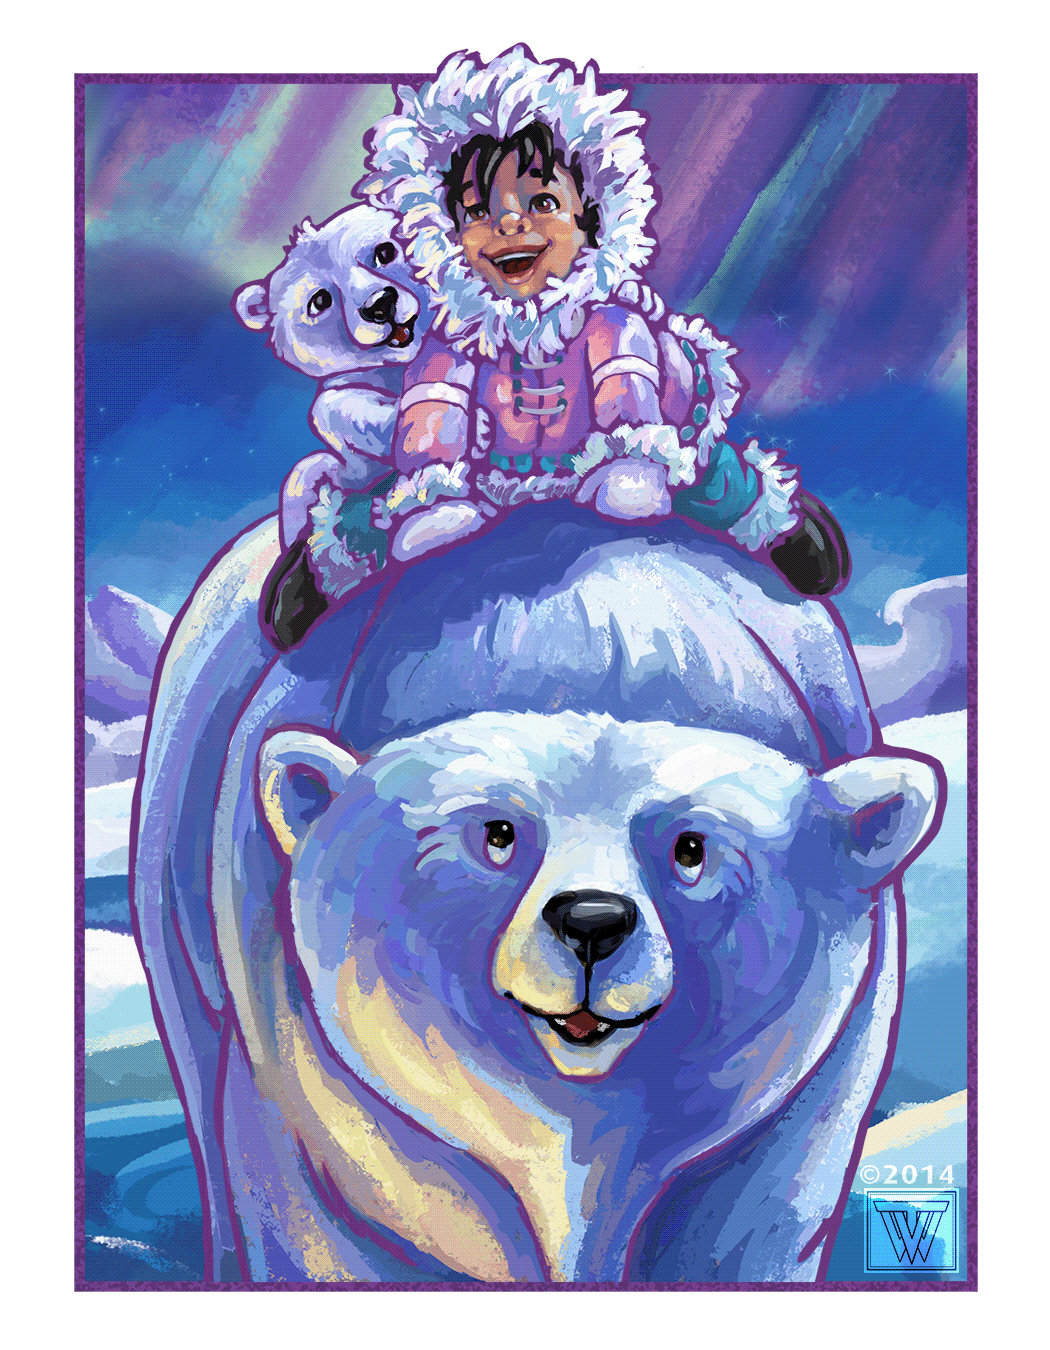 narrative kid's books children's illustration Picture book polar bears animals whimsical Northern Lights north